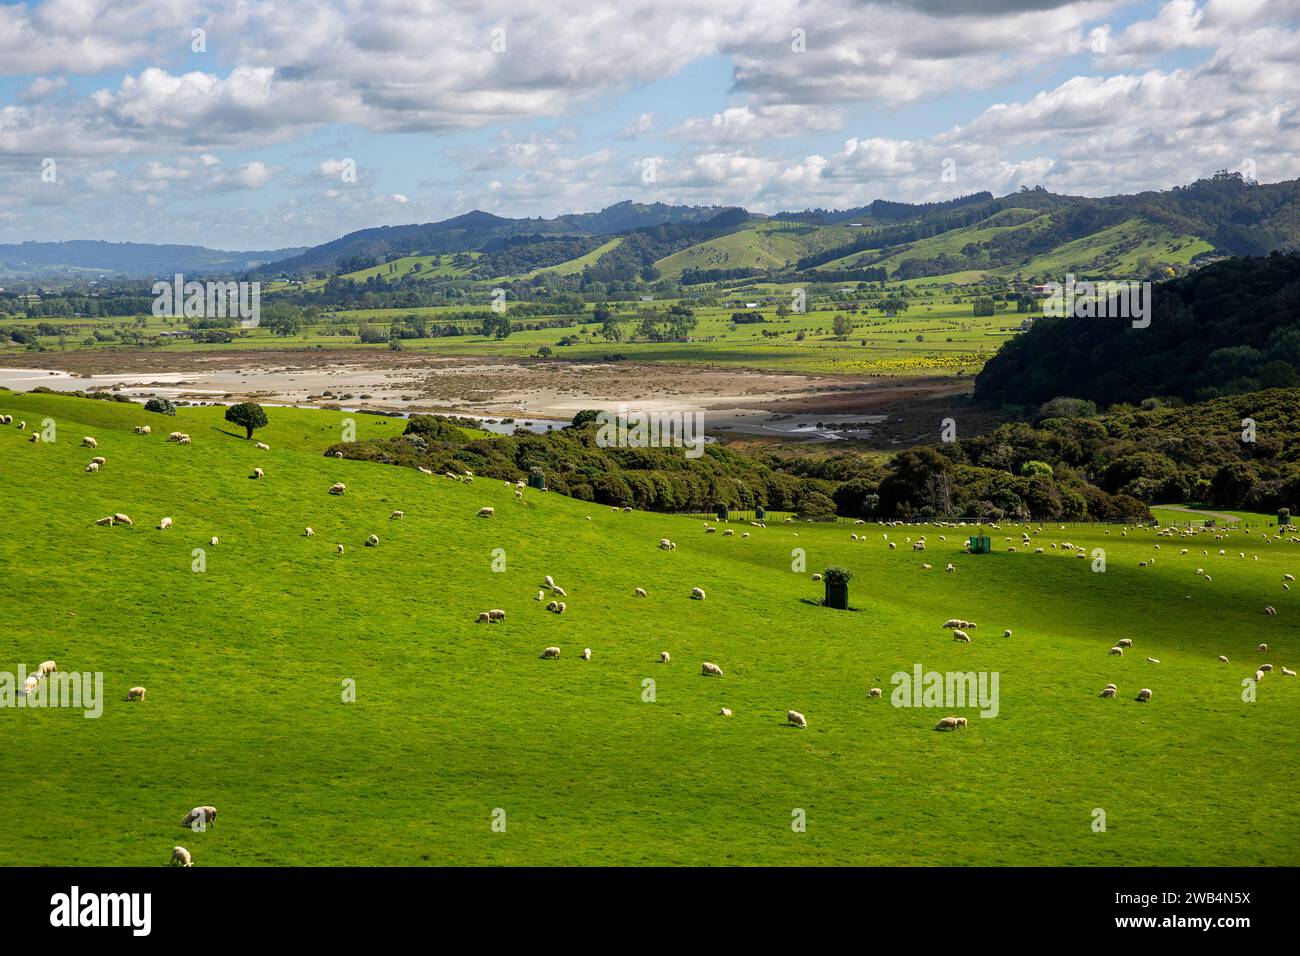 Sheep grazing in green pastures in the Duder Regional Park on the Te Ika-a-Maui (North Island) of Aotearoa (New Zealand), Tamaki Makaurau (Auckland Re Stock Photo